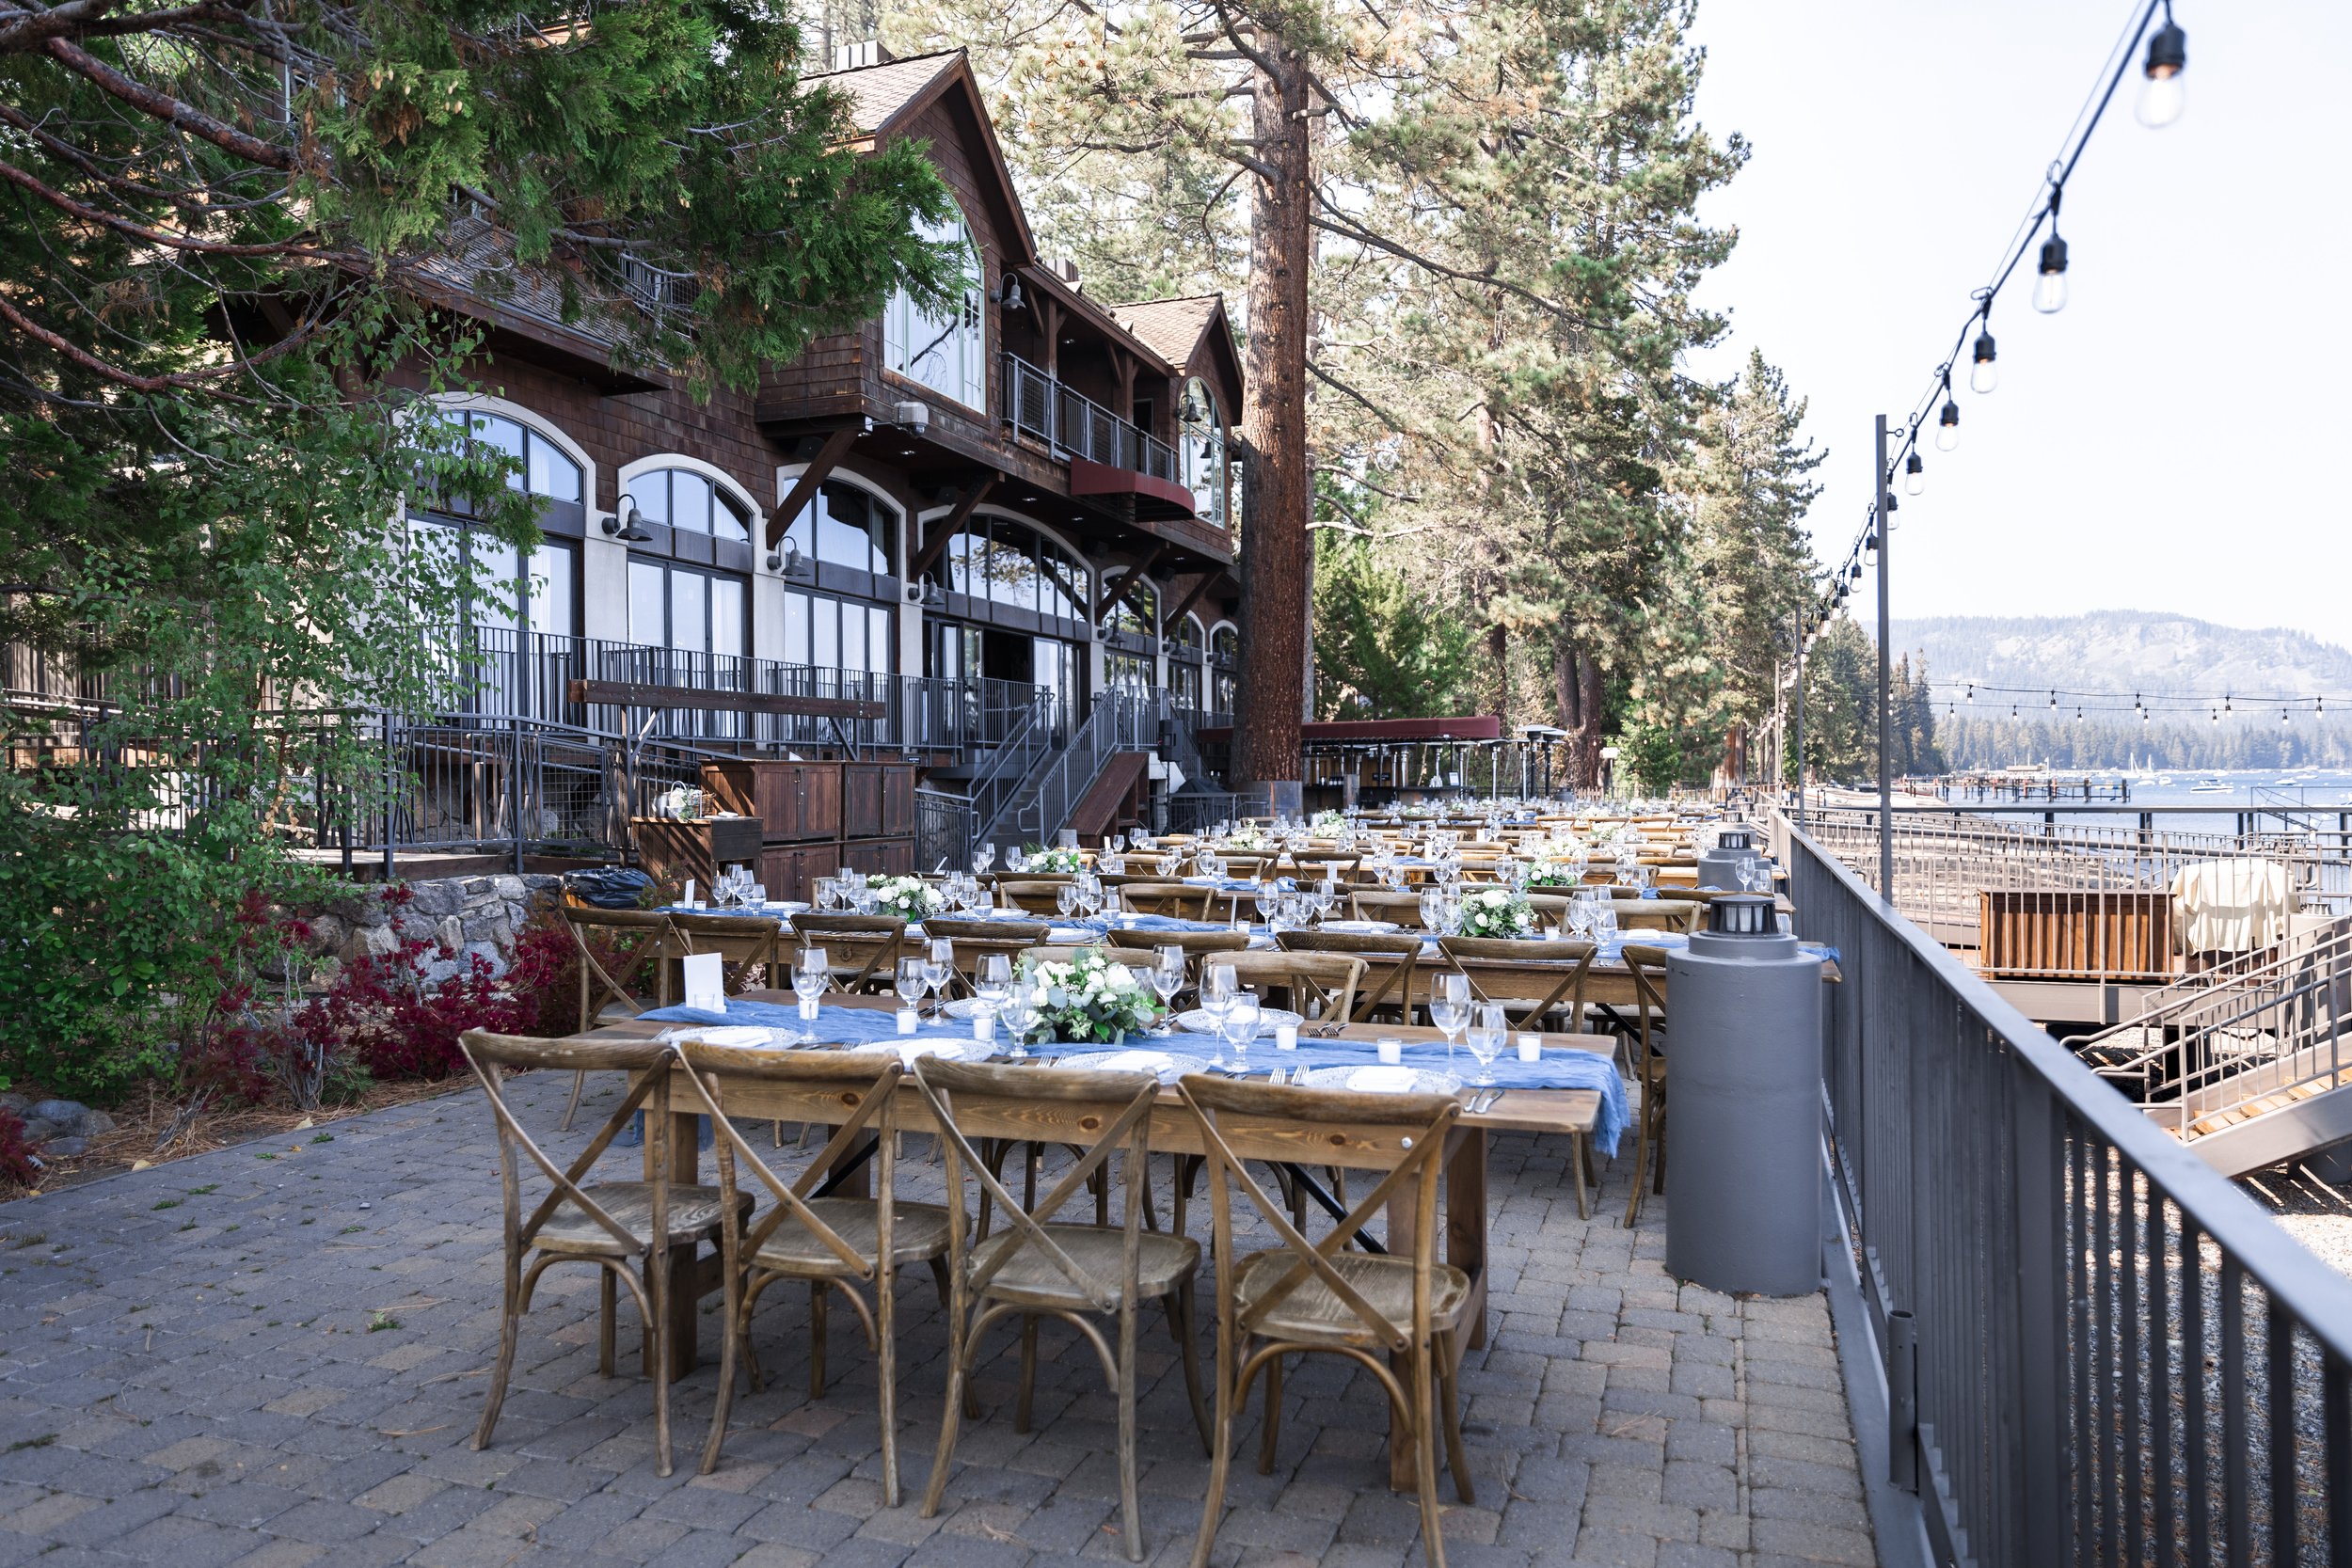  Savanna Richardson Photography captures a beautiful outdoor wedding lunch venue at Lake Tahoe, Nevada. outdoor lunch venue Lake Tahoe summer wed #savannarichardsonphotography #tahoewedding #lakesidewedding #outdoorwedding #summerwedding #laketahoe 